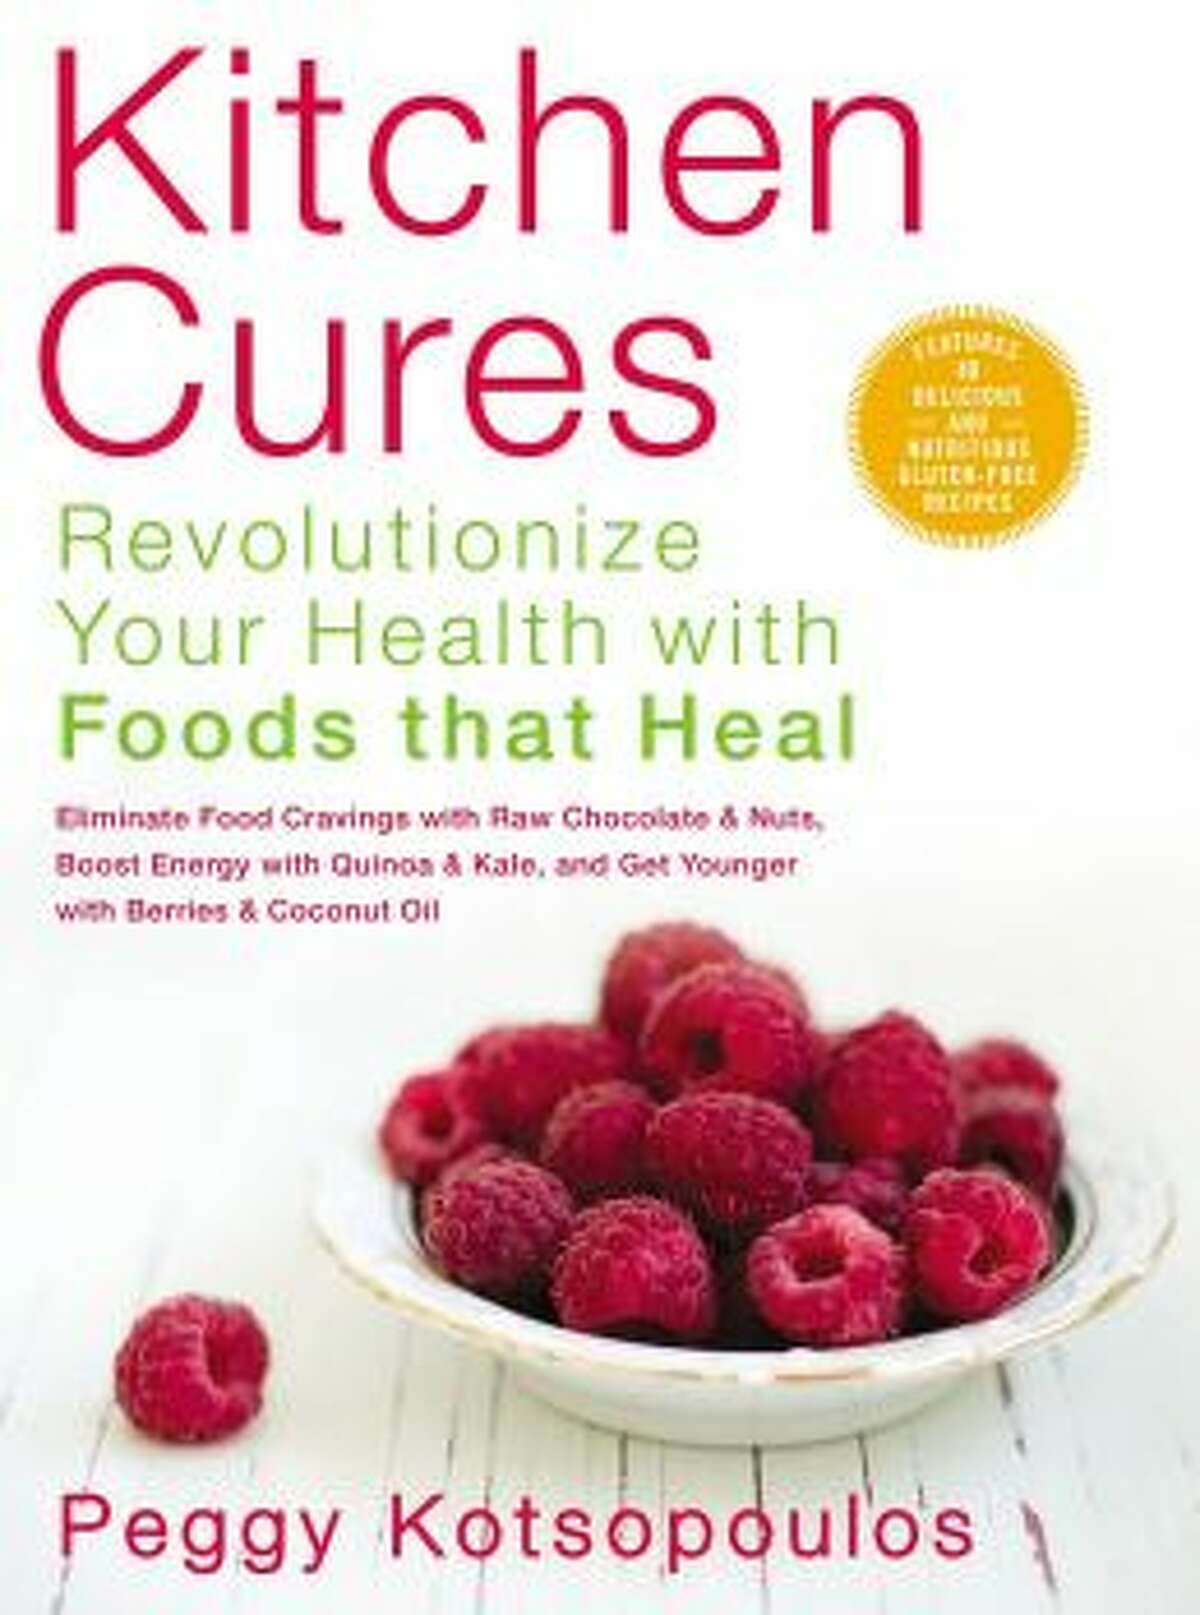 Kitchen Cures: Revolutionize Your Health with Foods That Heal, by Peggy Kotsopoulos (Pintail; $25)